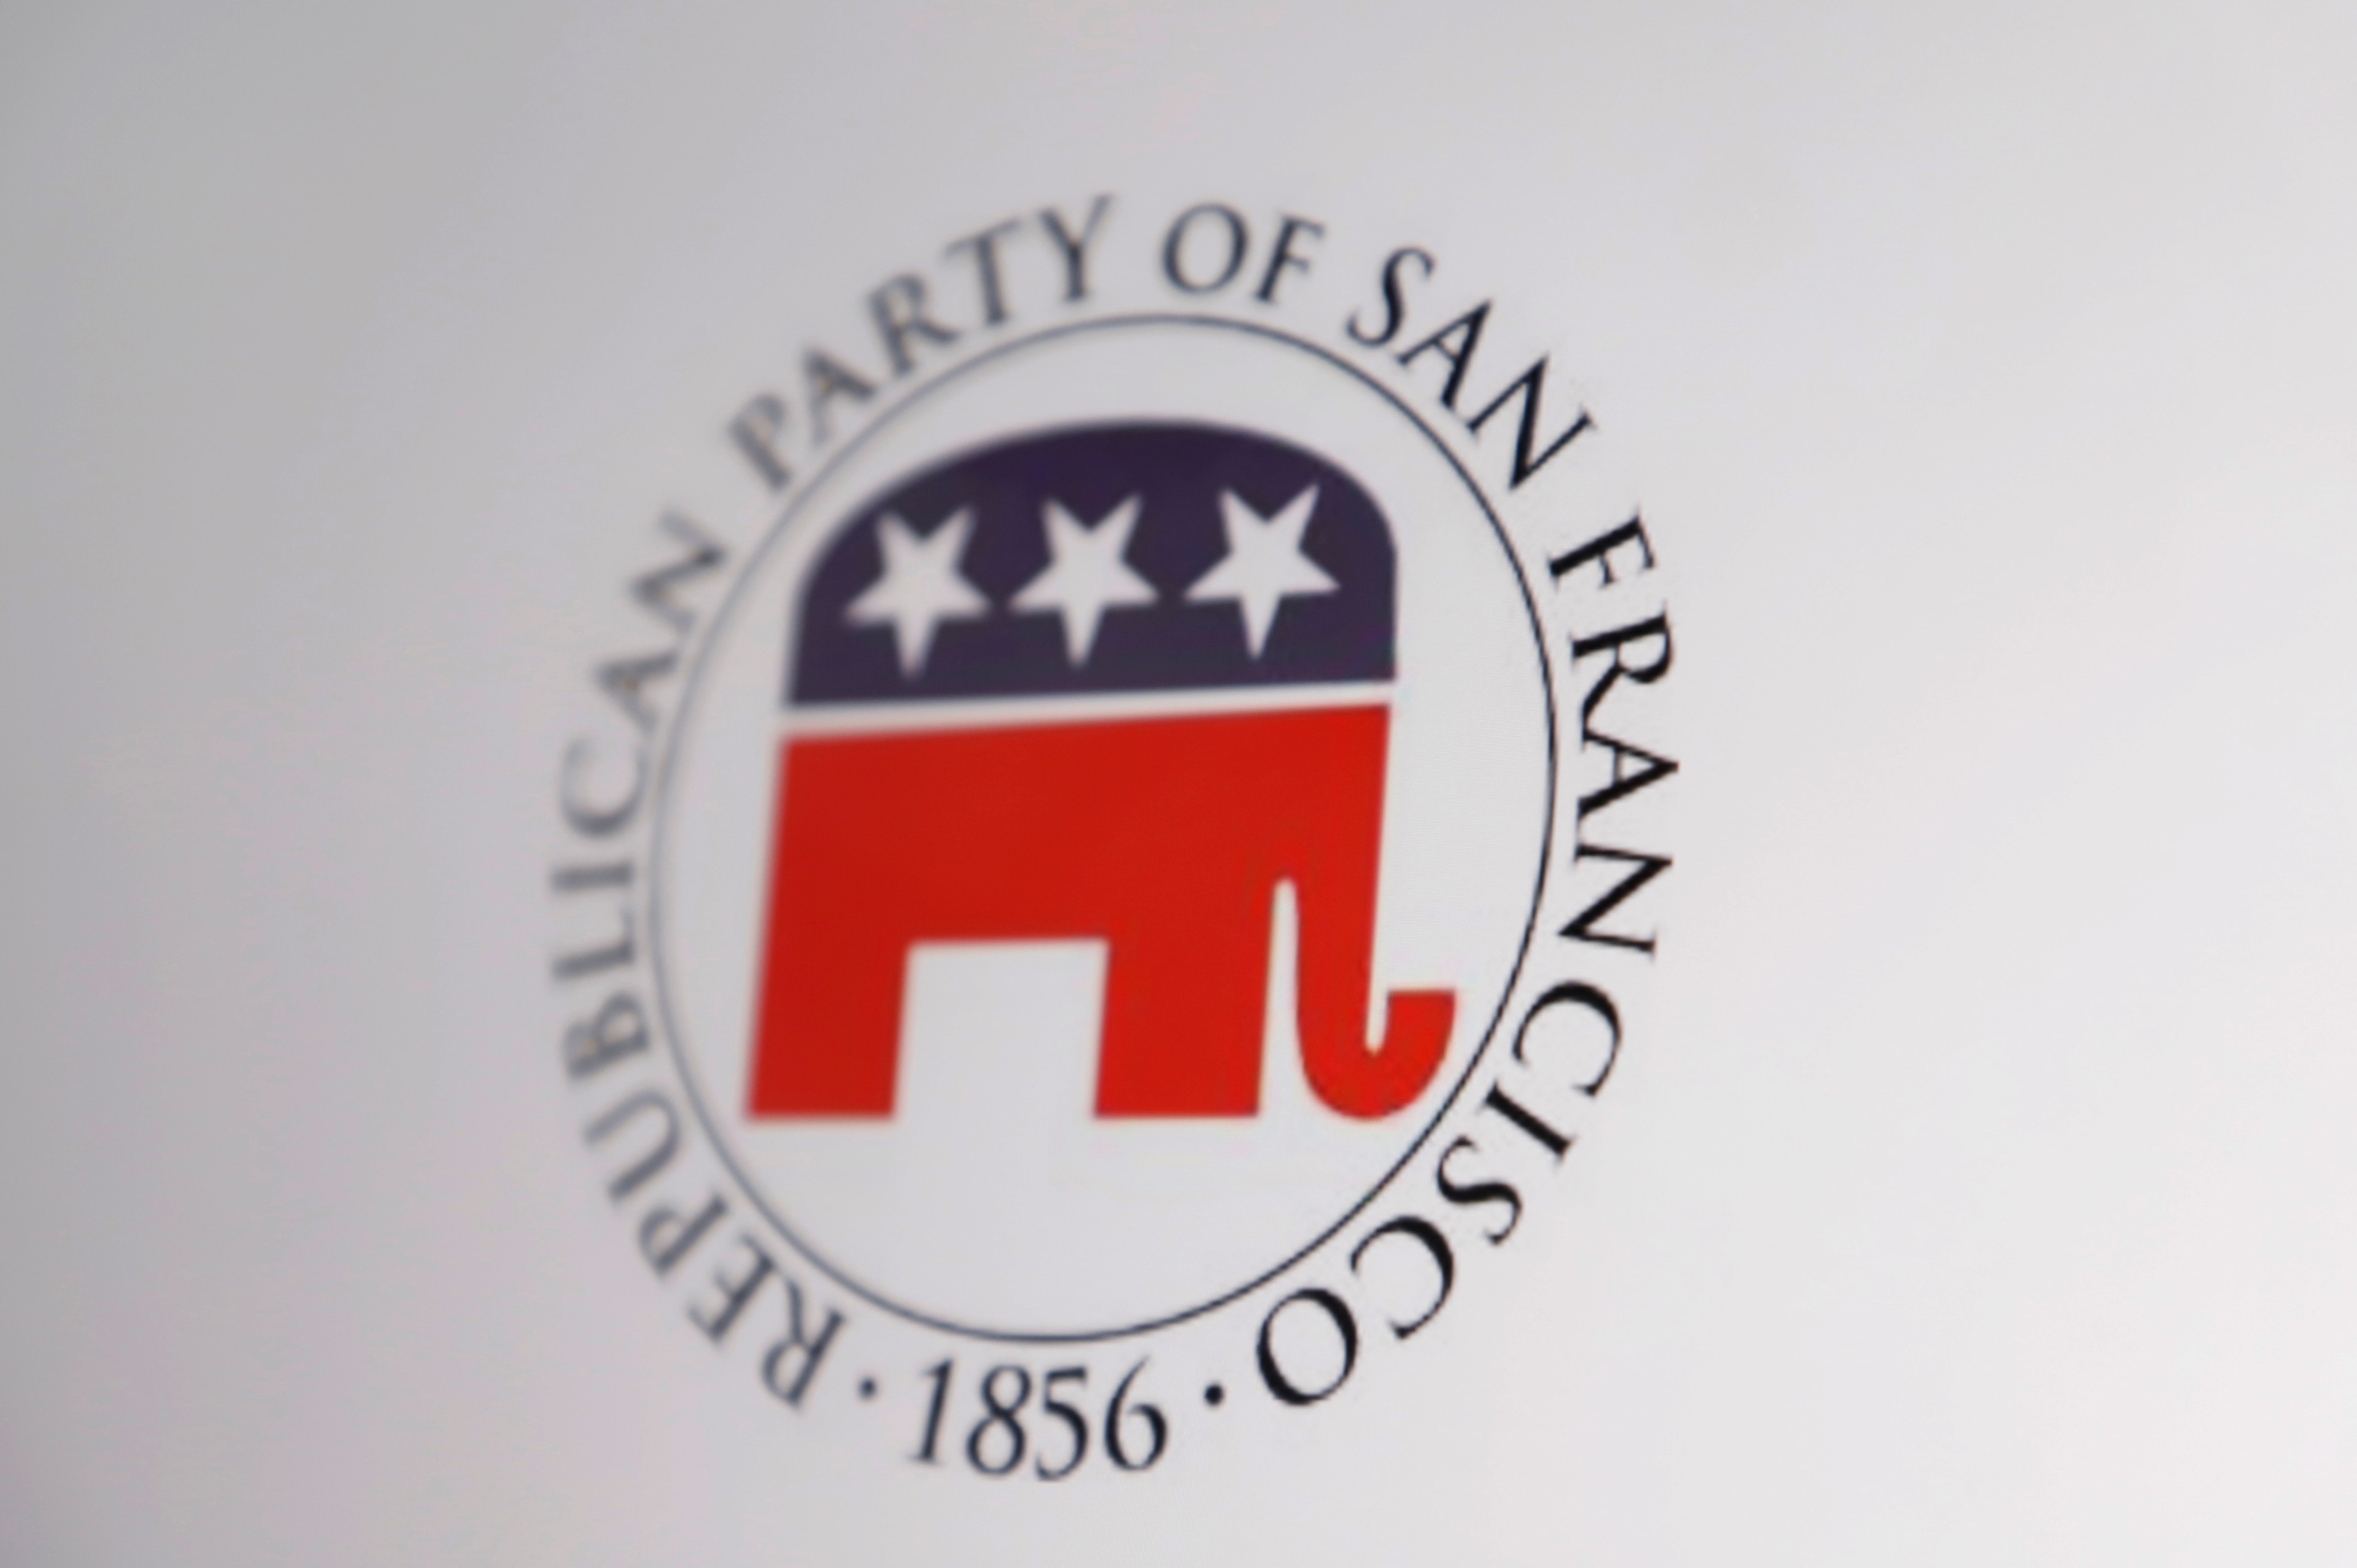 The image shows the logo of the Republican Party of San Francisco. It features a red elephant with three white stars on a blue background, encircled by text.